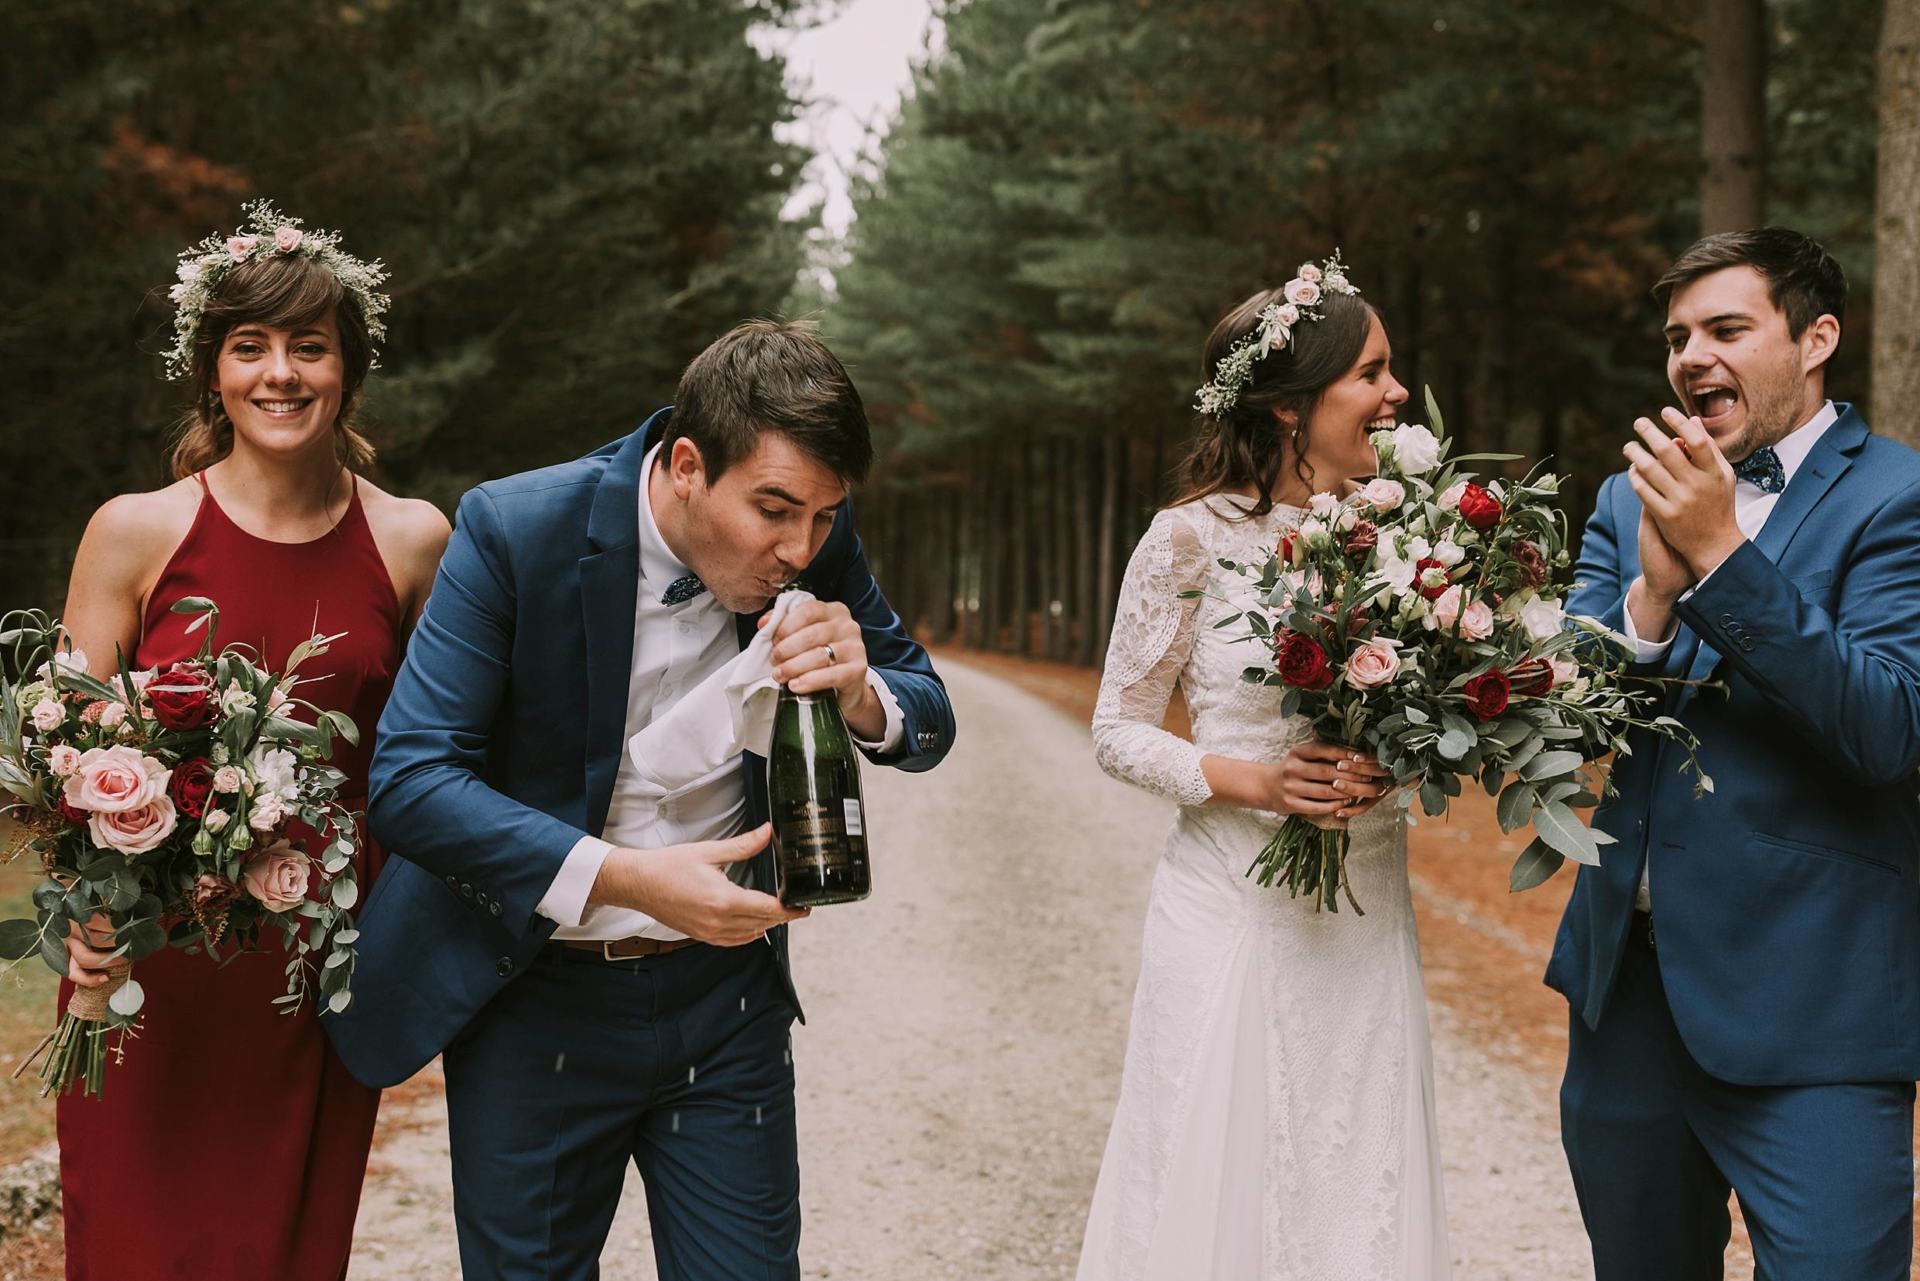 Charlotte Kiri Photography - Wedding Photography of a bride wearing a floral wreath and long-sleeved vintage dress and groom wearing a steel blue suit, and members of the bridal party smiling and drinking champagne as they walk down a gravel road lined with trees at Criffel Station, Wanaka, New Zealand.